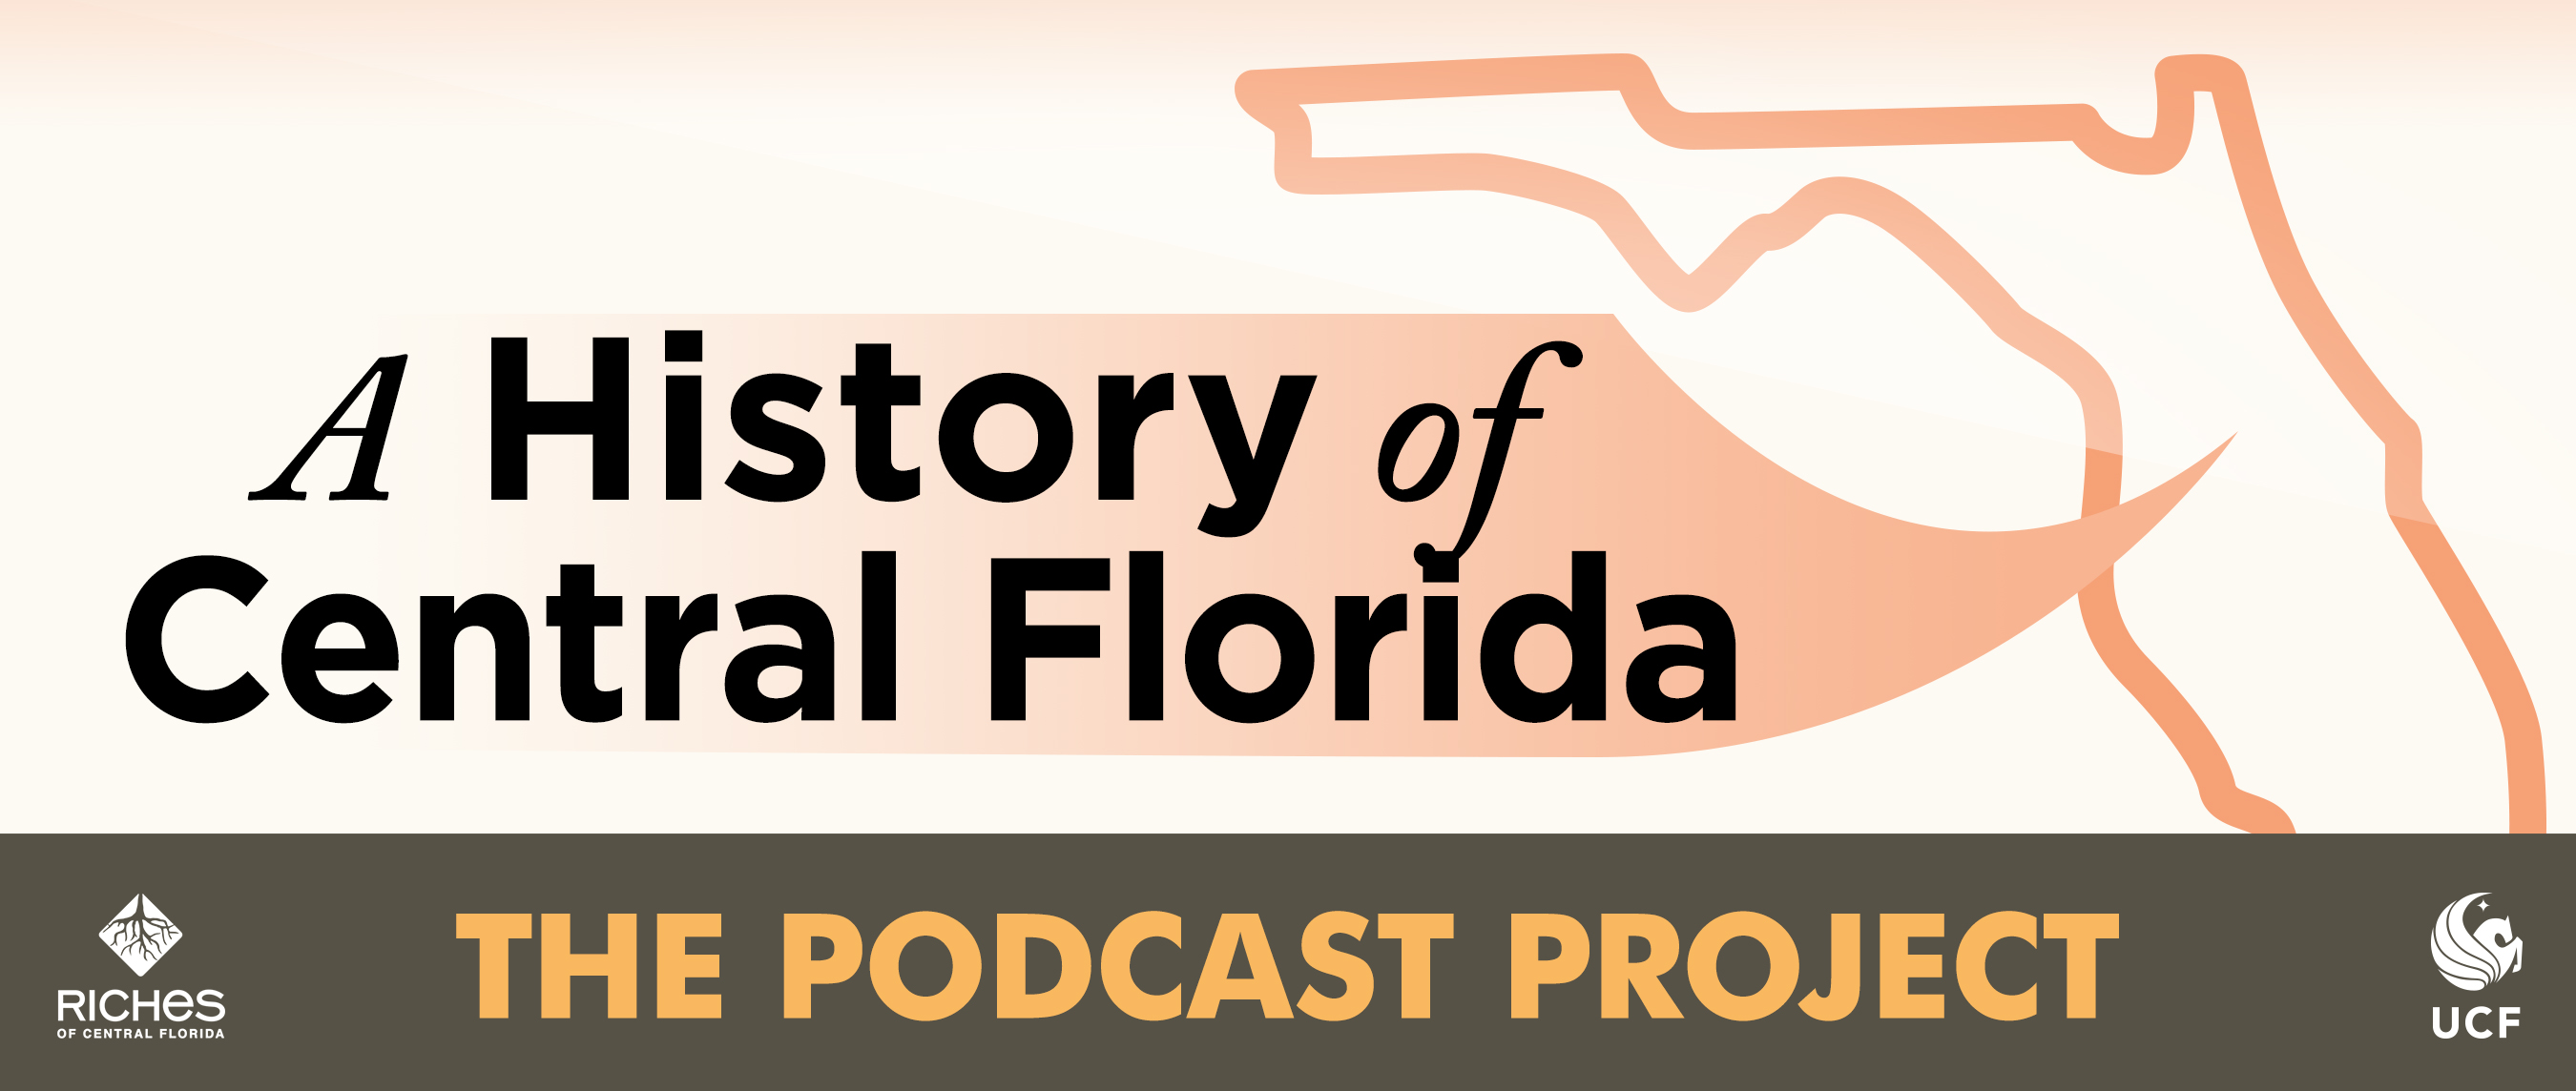 A History of Central Florida: Podcast Project Main Page